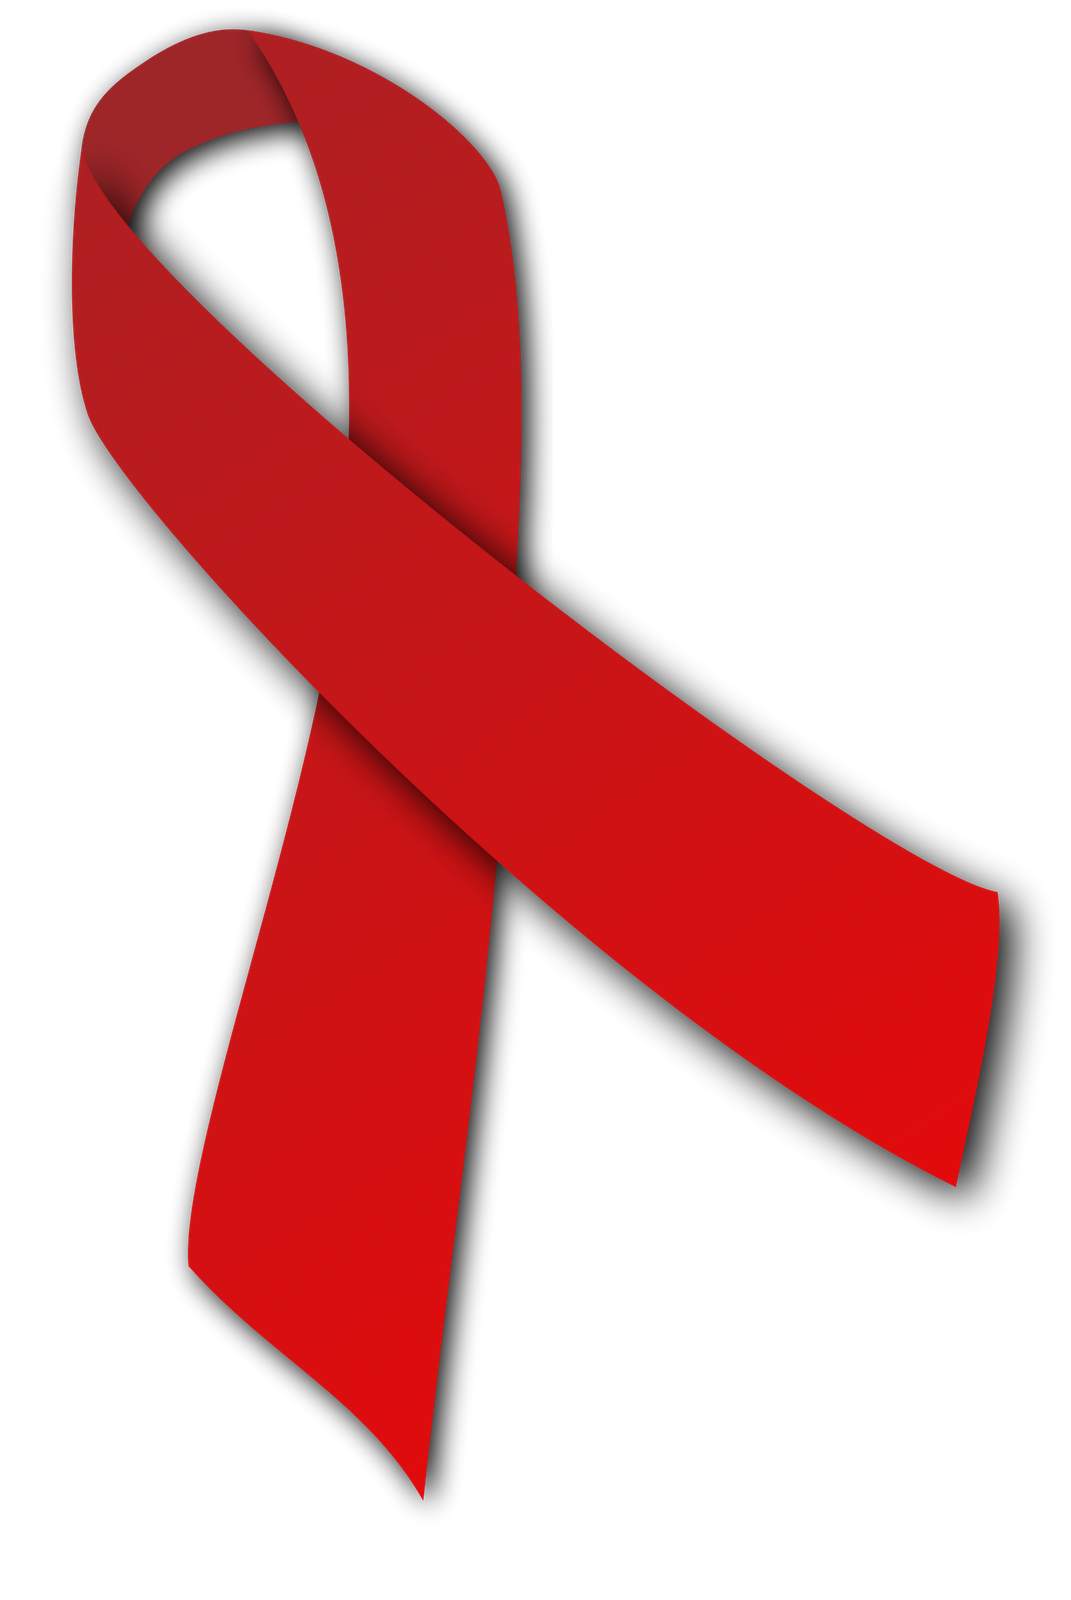 Hiv Awareness Ribbon Clip Art | Clipart library - Free Clipart Images